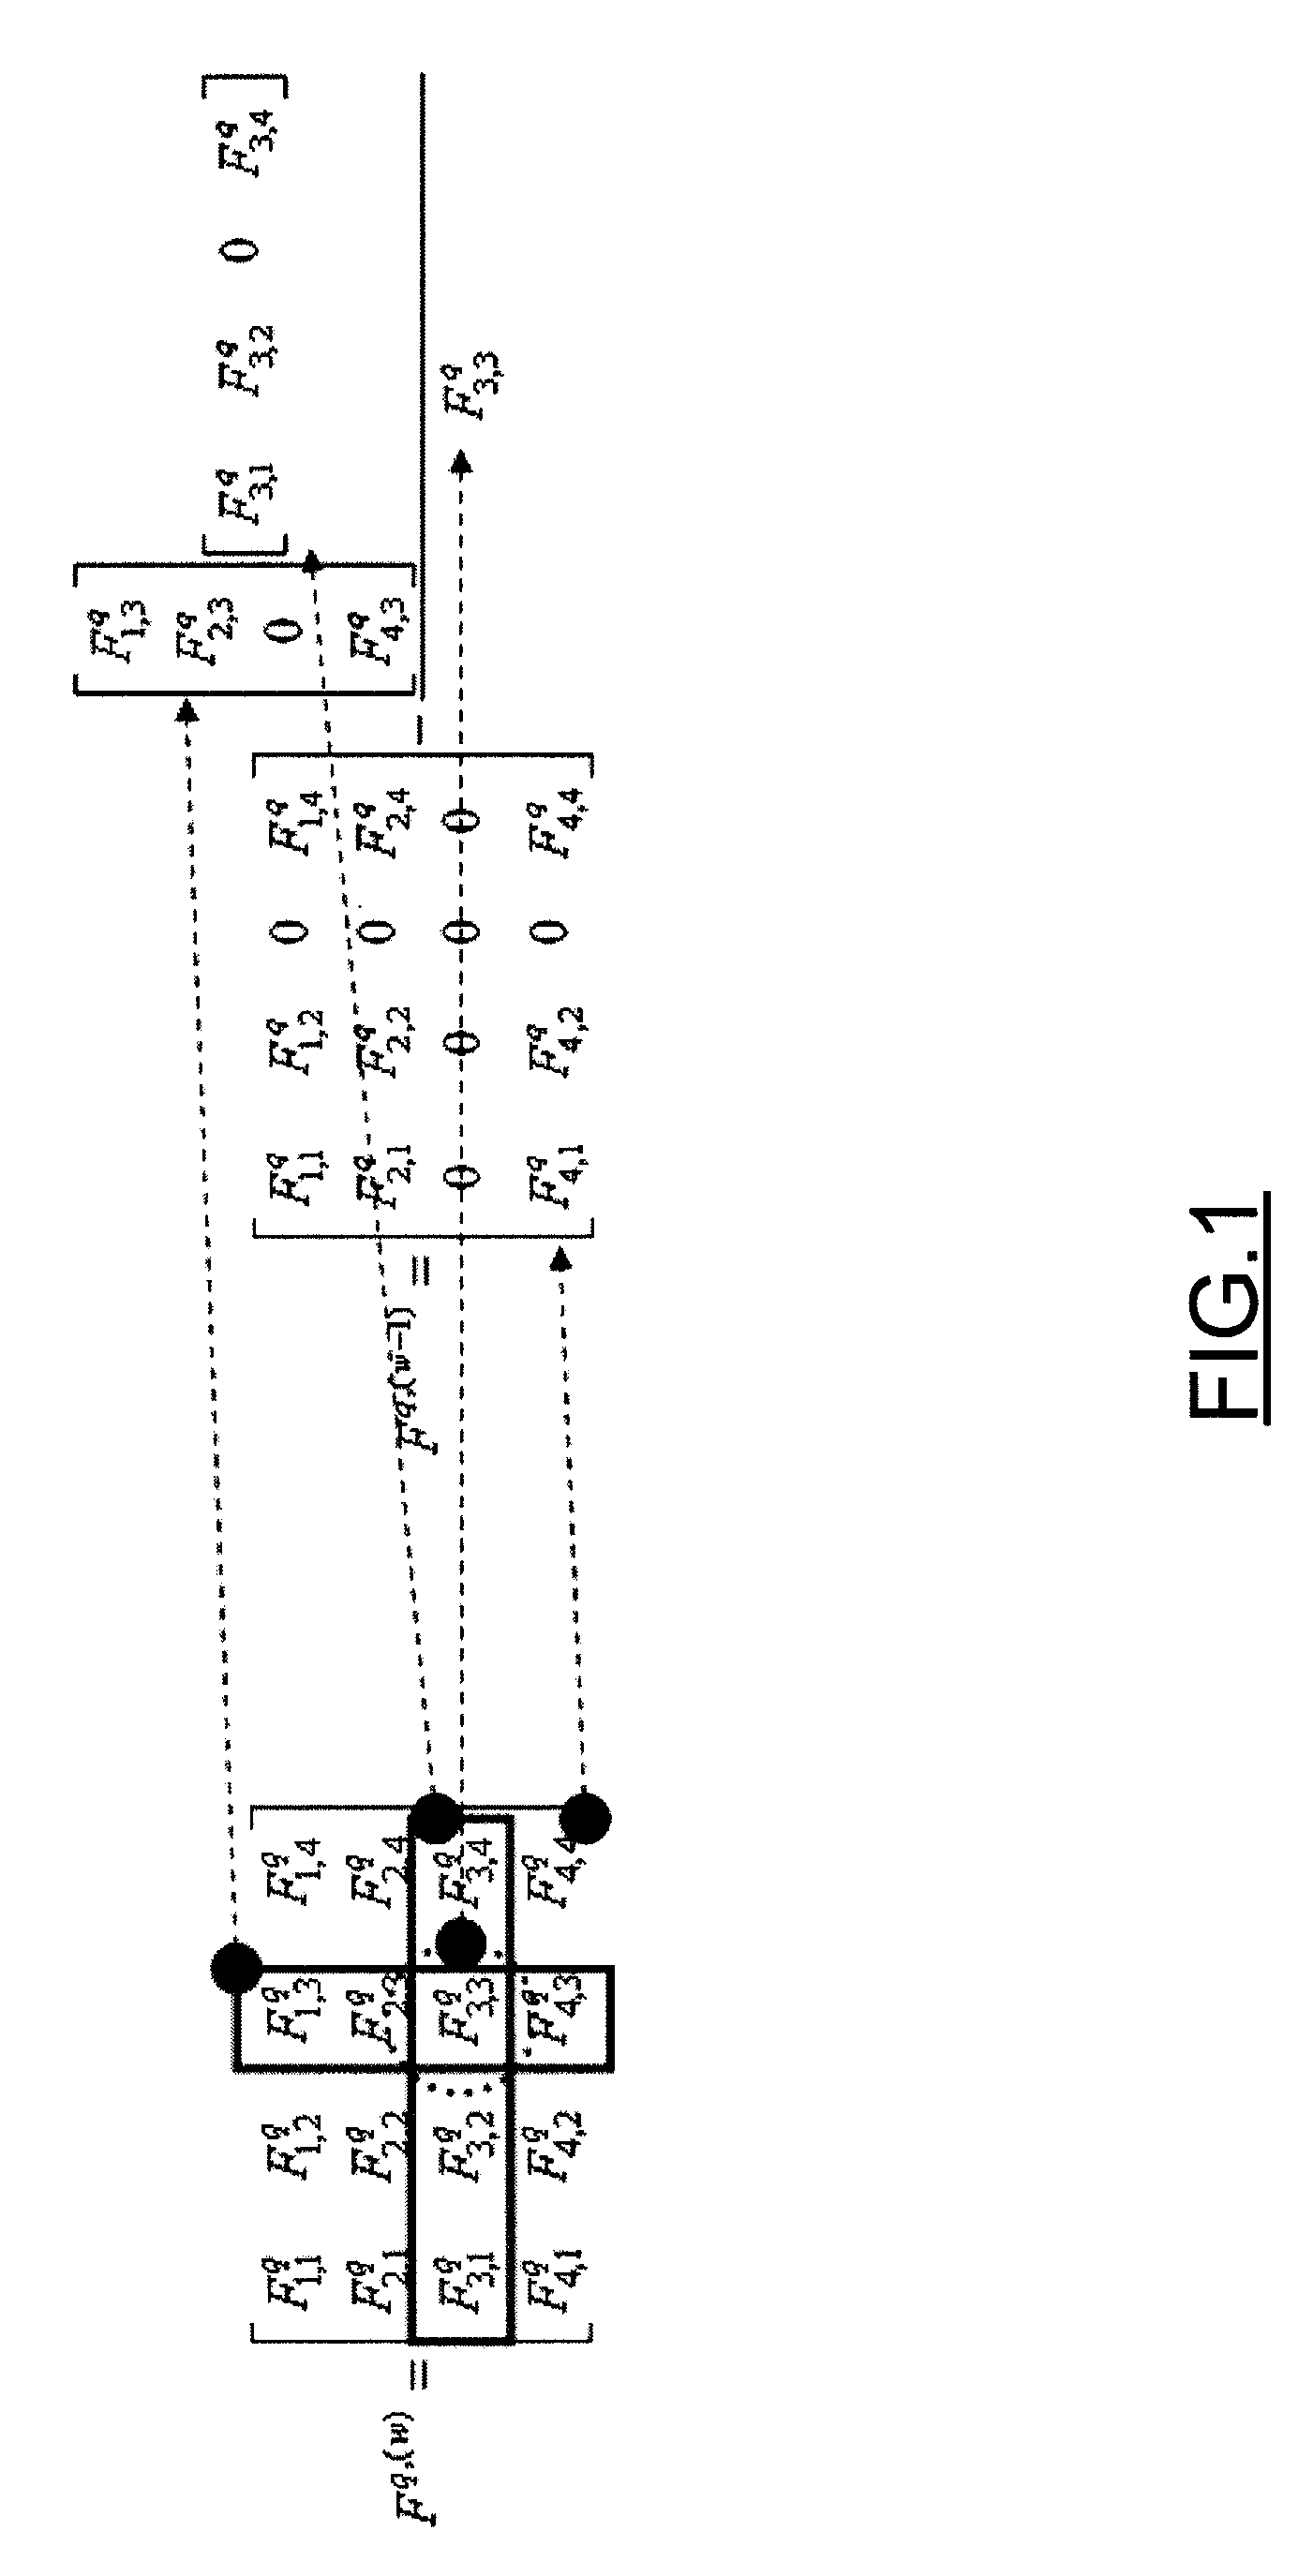 Method, Apparatus, and Computer Program Product for Decoding Signals in a Wireless Communication Environment